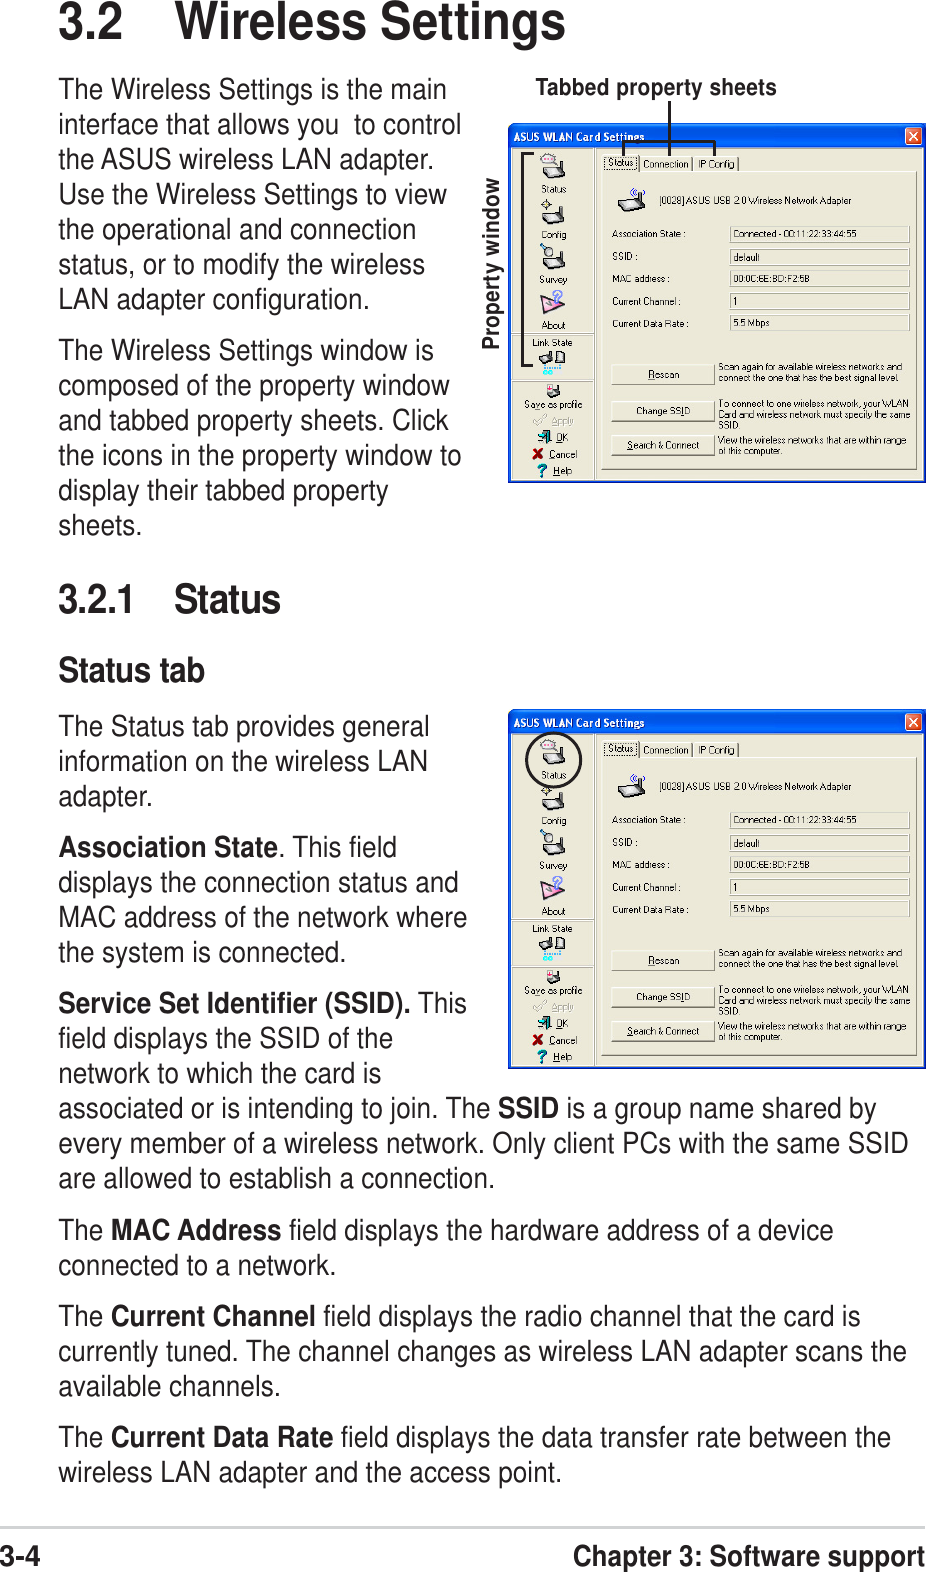 3-4Chapter 3: Software support3.2 Wireless SettingsThe Wireless Settings is the maininterface that allows you  to controlthe ASUS wireless LAN adapter.Use the Wireless Settings to viewthe operational and connectionstatus, or to modify the wirelessLAN adapter configuration.The Wireless Settings window iscomposed of the property windowand tabbed property sheets. Clickthe icons in the property window todisplay their tabbed propertysheets.Property windowTabbed property sheets3.2.1 StatusStatus tabThe Status tab provides generalinformation on the wireless LANadapter.Association State. This fielddisplays the connection status andMAC address of the network wherethe system is connected.Service Set Identifier (SSID). Thisfield displays the SSID of thenetwork to which the card isassociated or is intending to join. The SSID is a group name shared byevery member of a wireless network. Only client PCs with the same SSIDare allowed to establish a connection.The MAC Address field displays the hardware address of a deviceconnected to a network.The Current Channel field displays the radio channel that the card iscurrently tuned. The channel changes as wireless LAN adapter scans theavailable channels.The Current Data Rate field displays the data transfer rate between thewireless LAN adapter and the access point.